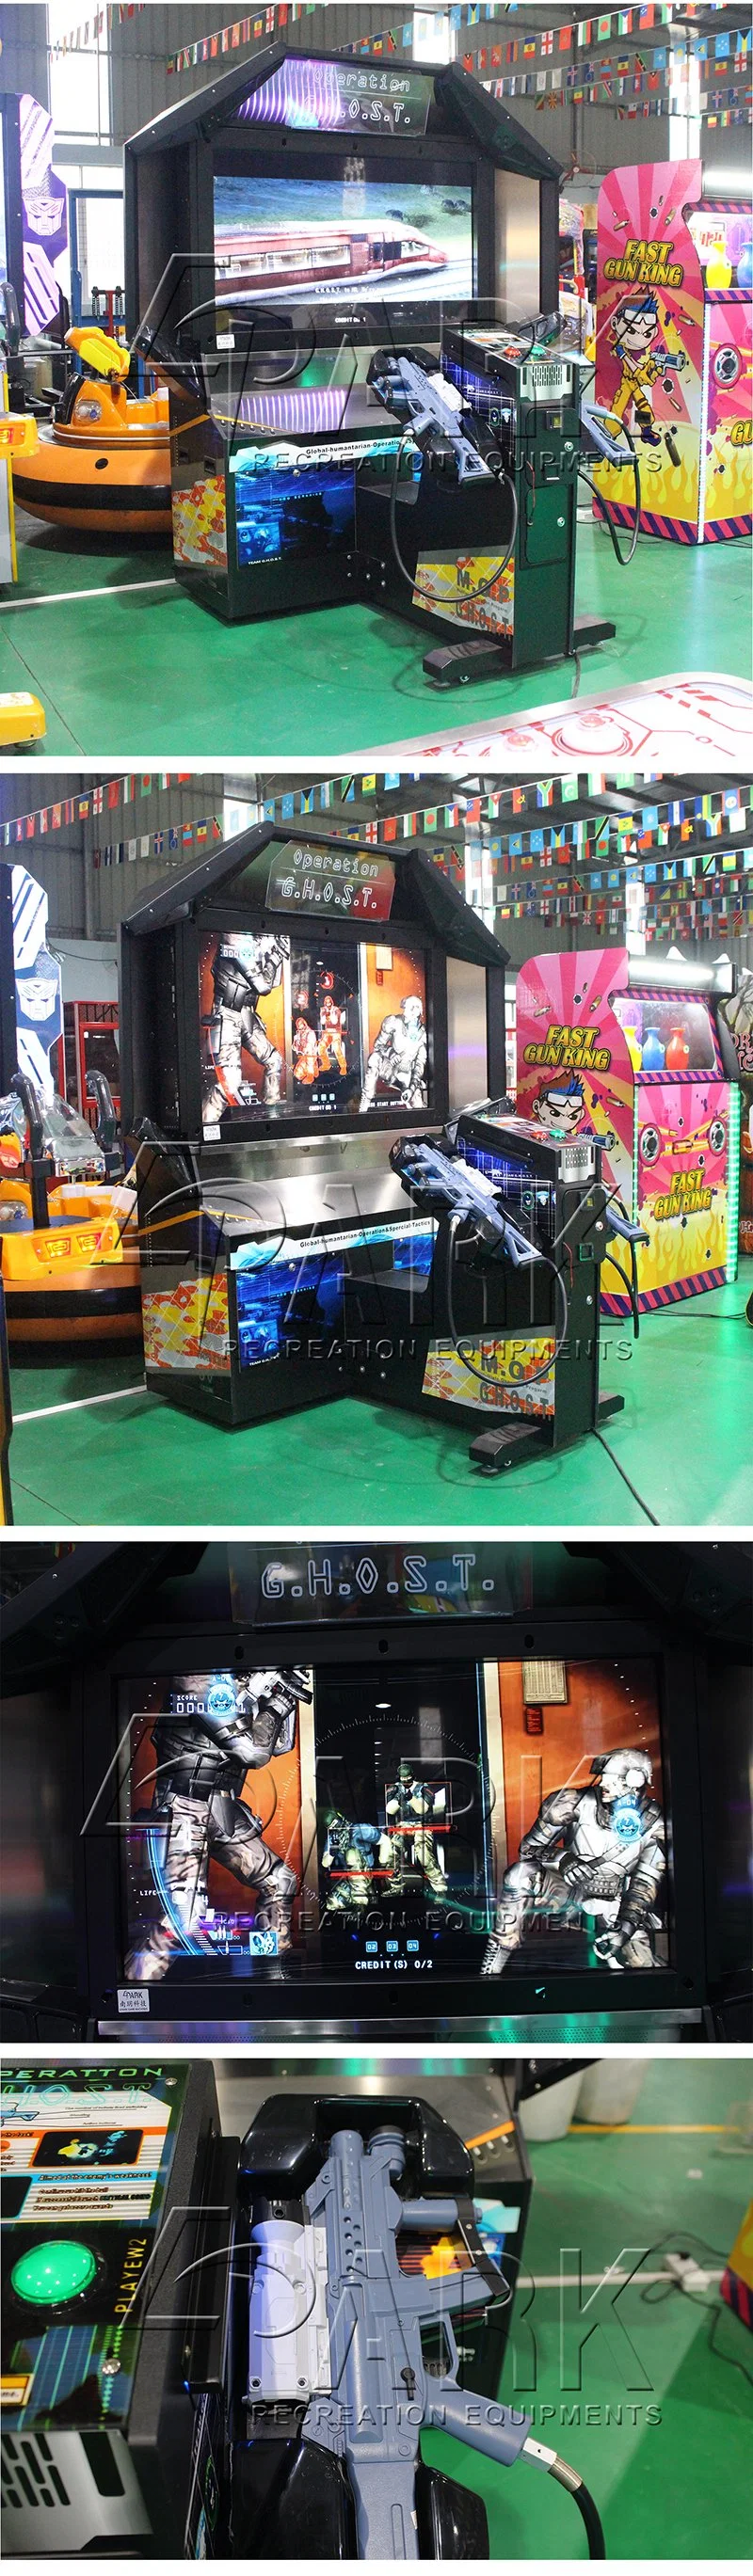 Operation Ghost Video Arcade Shooting Game Coin Operated Machine